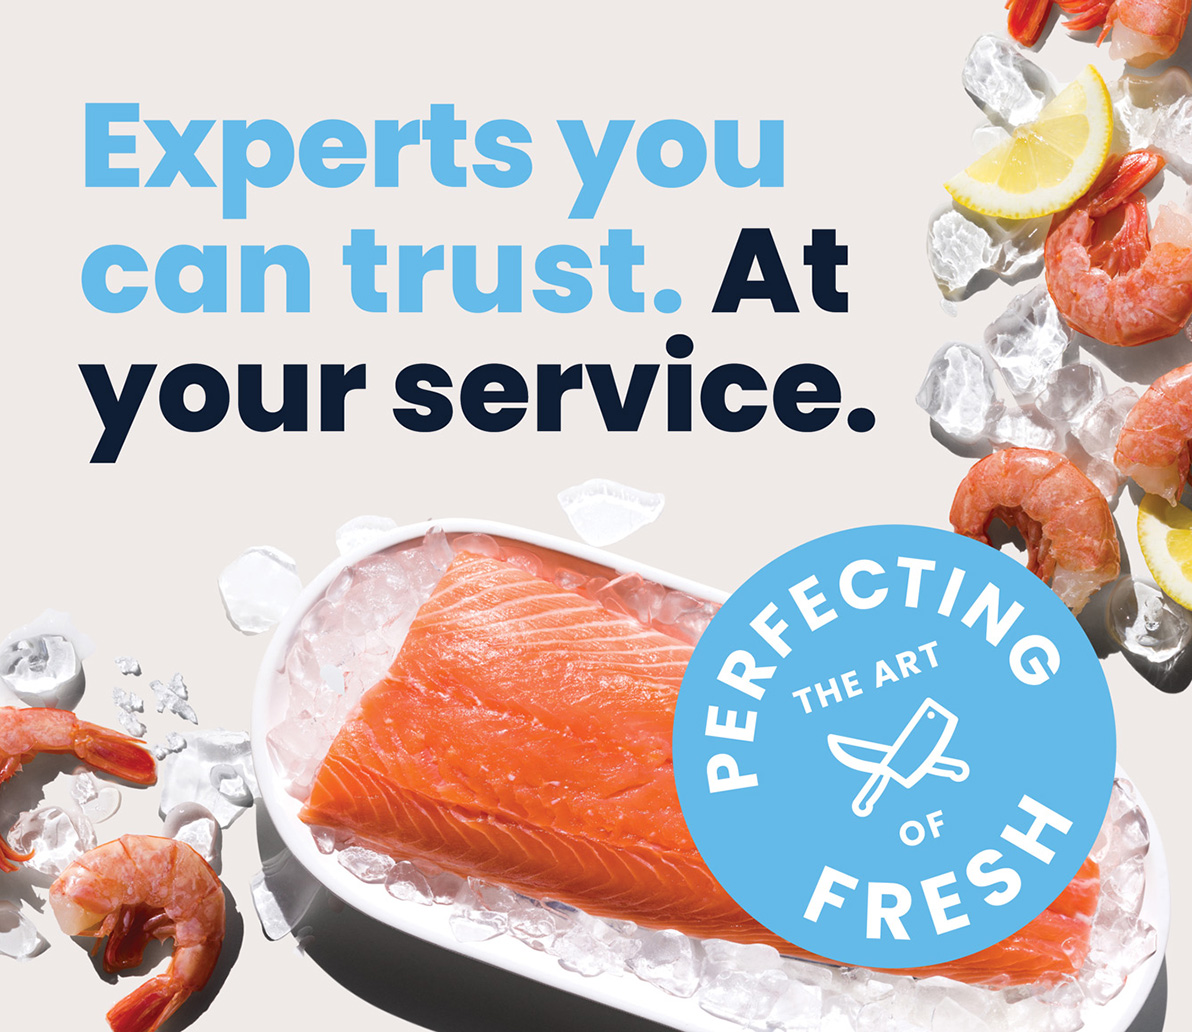 Experts you can trust. At your service.